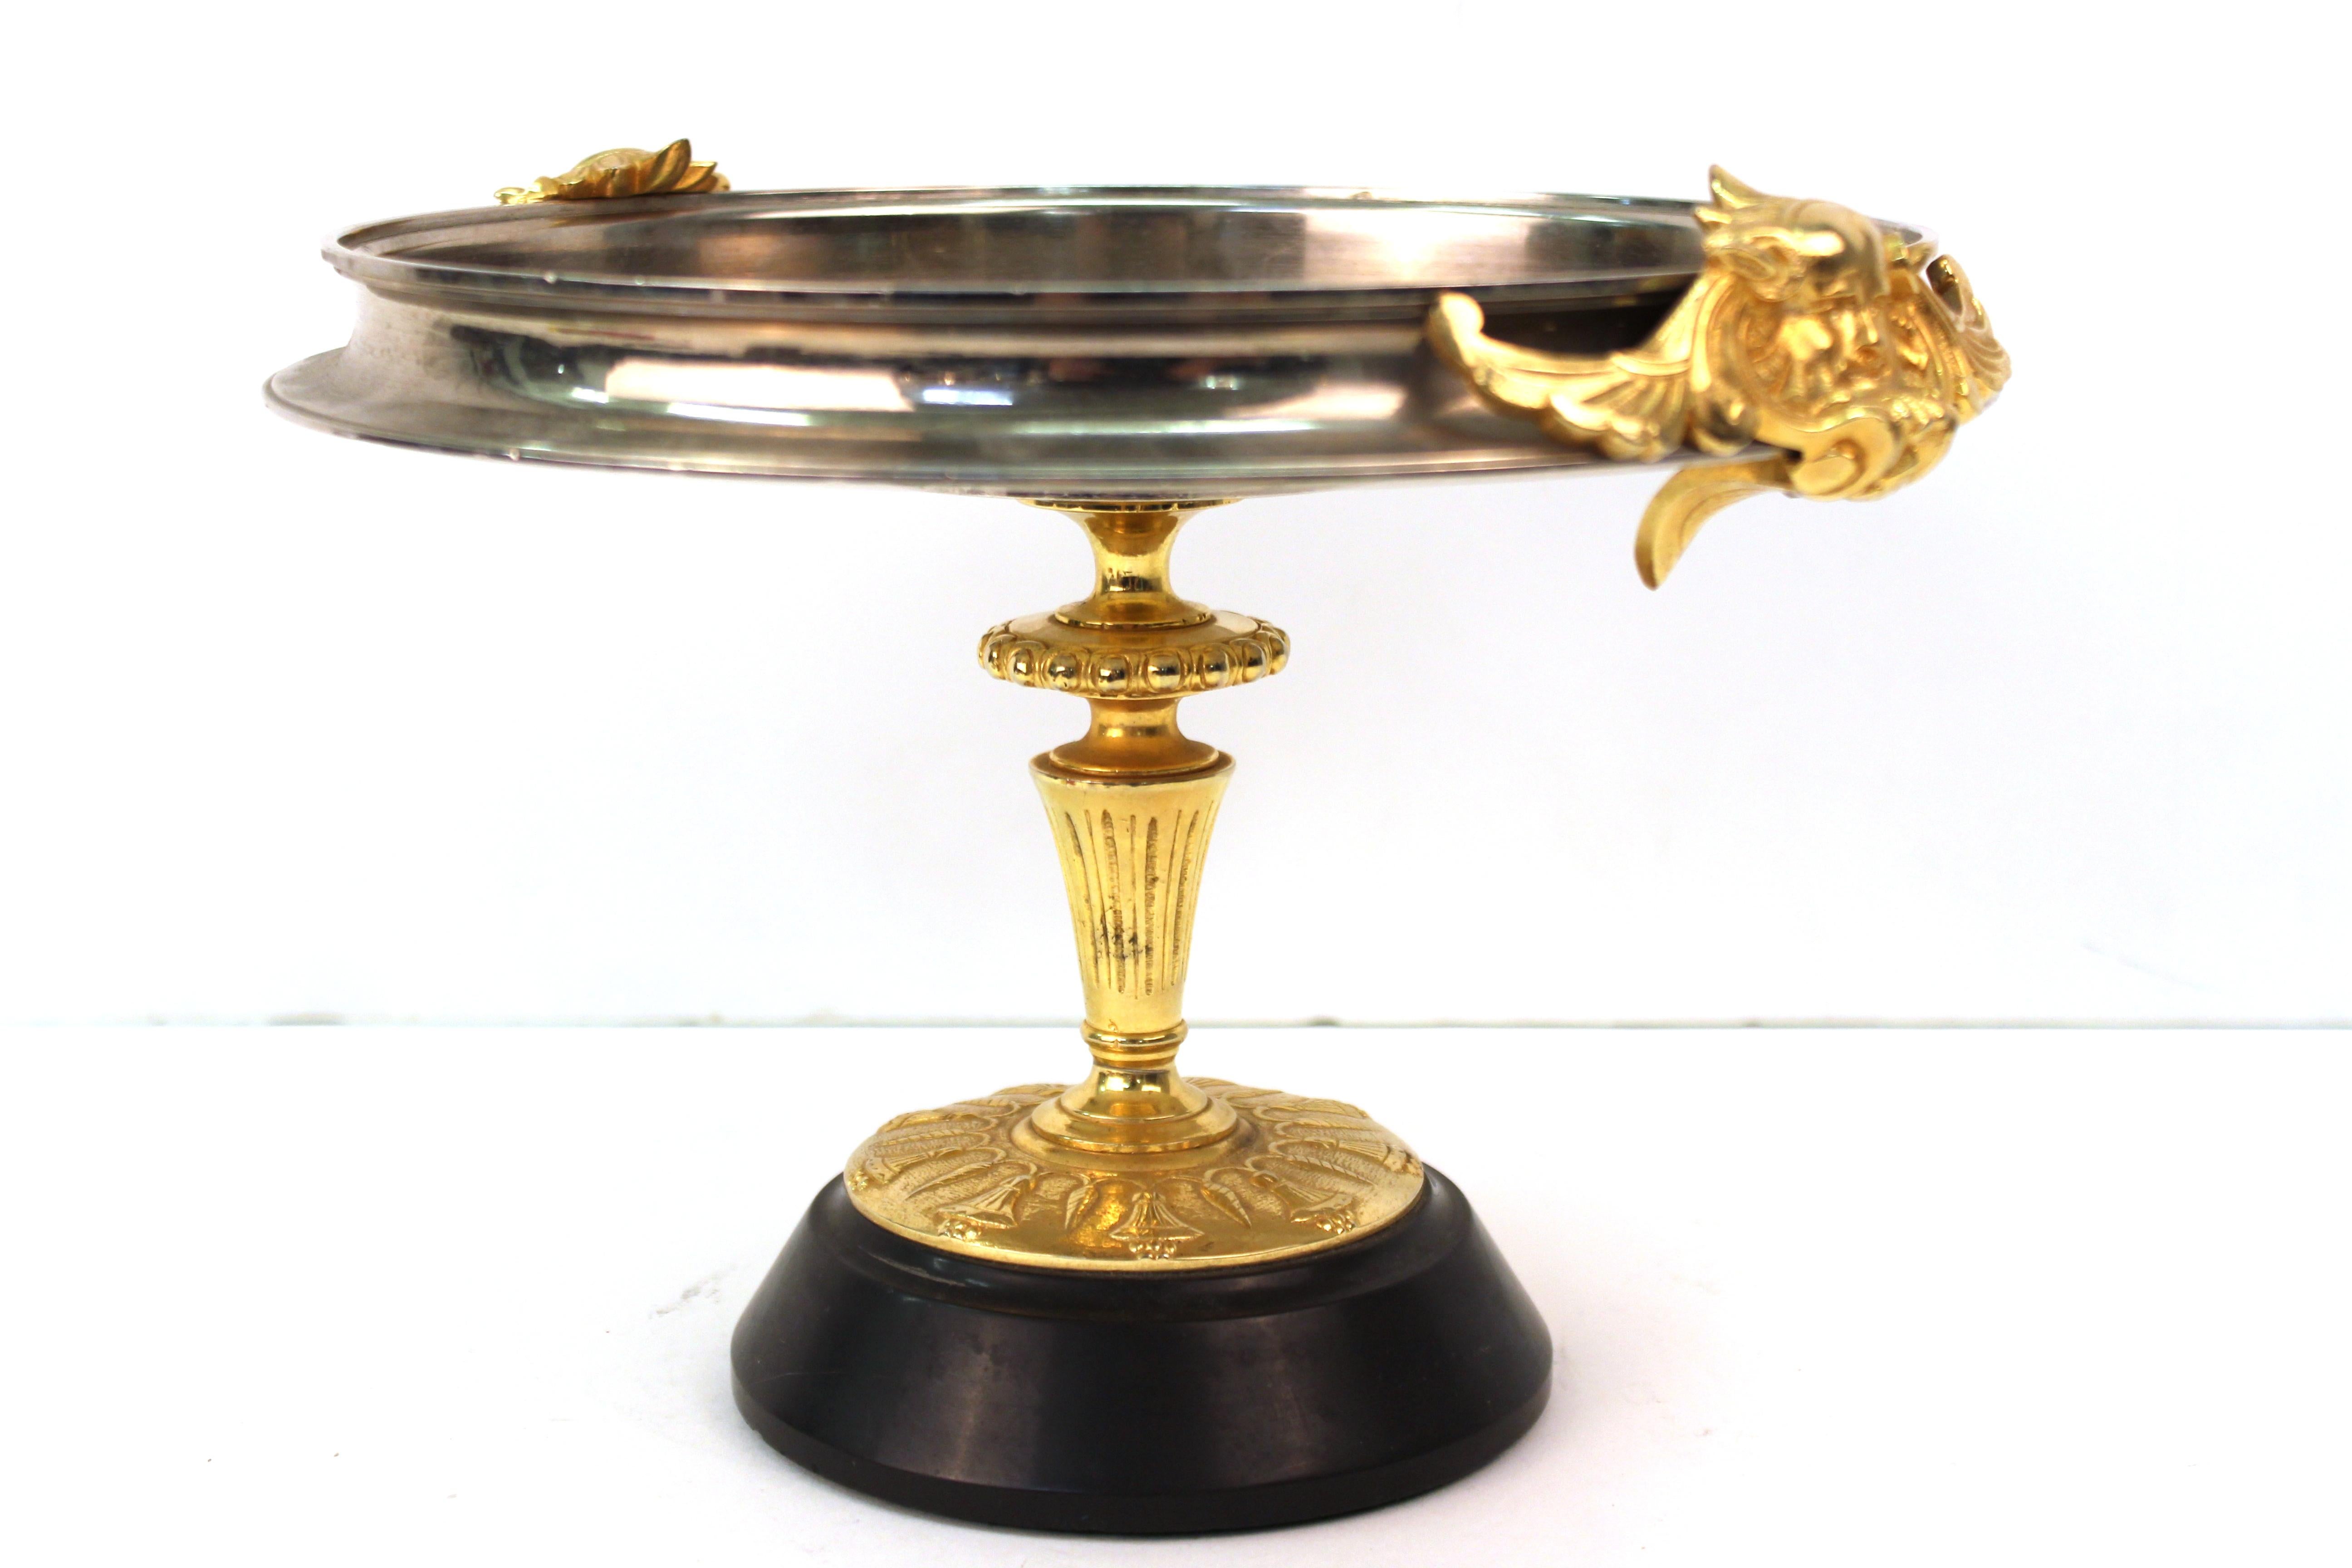 Neoclassical Revival Continental Grand Tour Tazza with Neoclassical Medallion For Sale